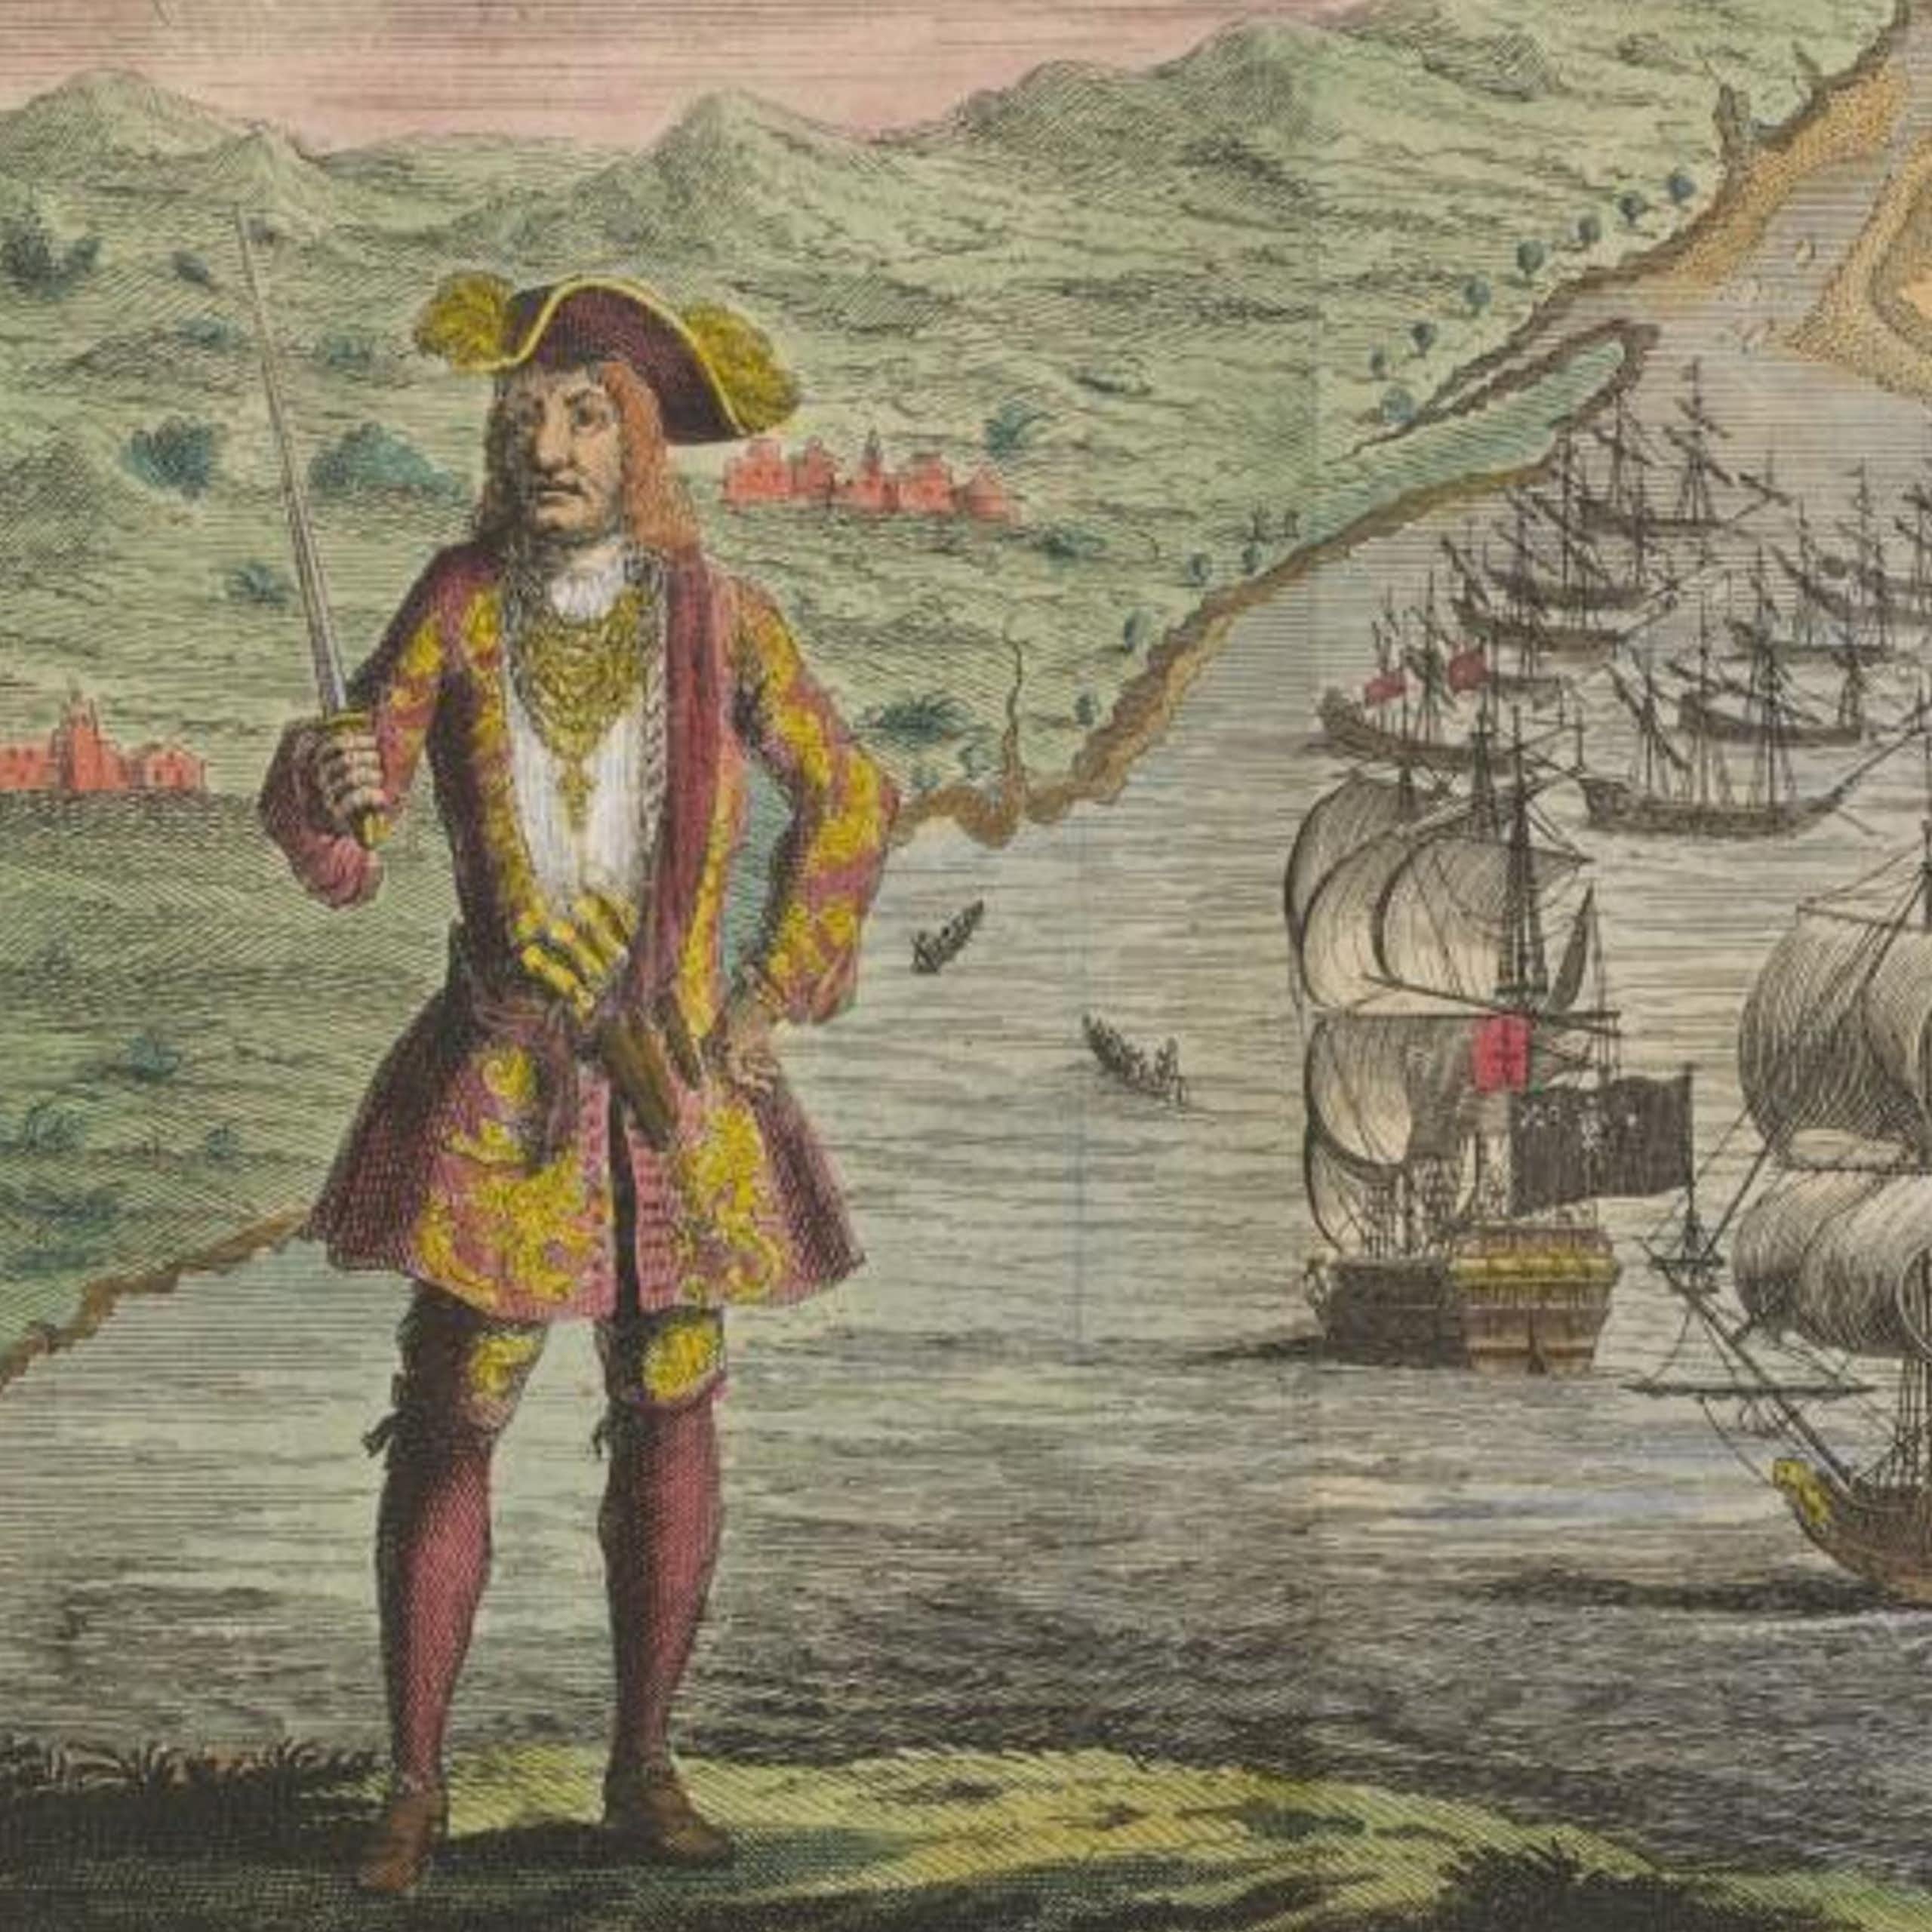 A historical coloured etching of a pirate and a fleet of ships.